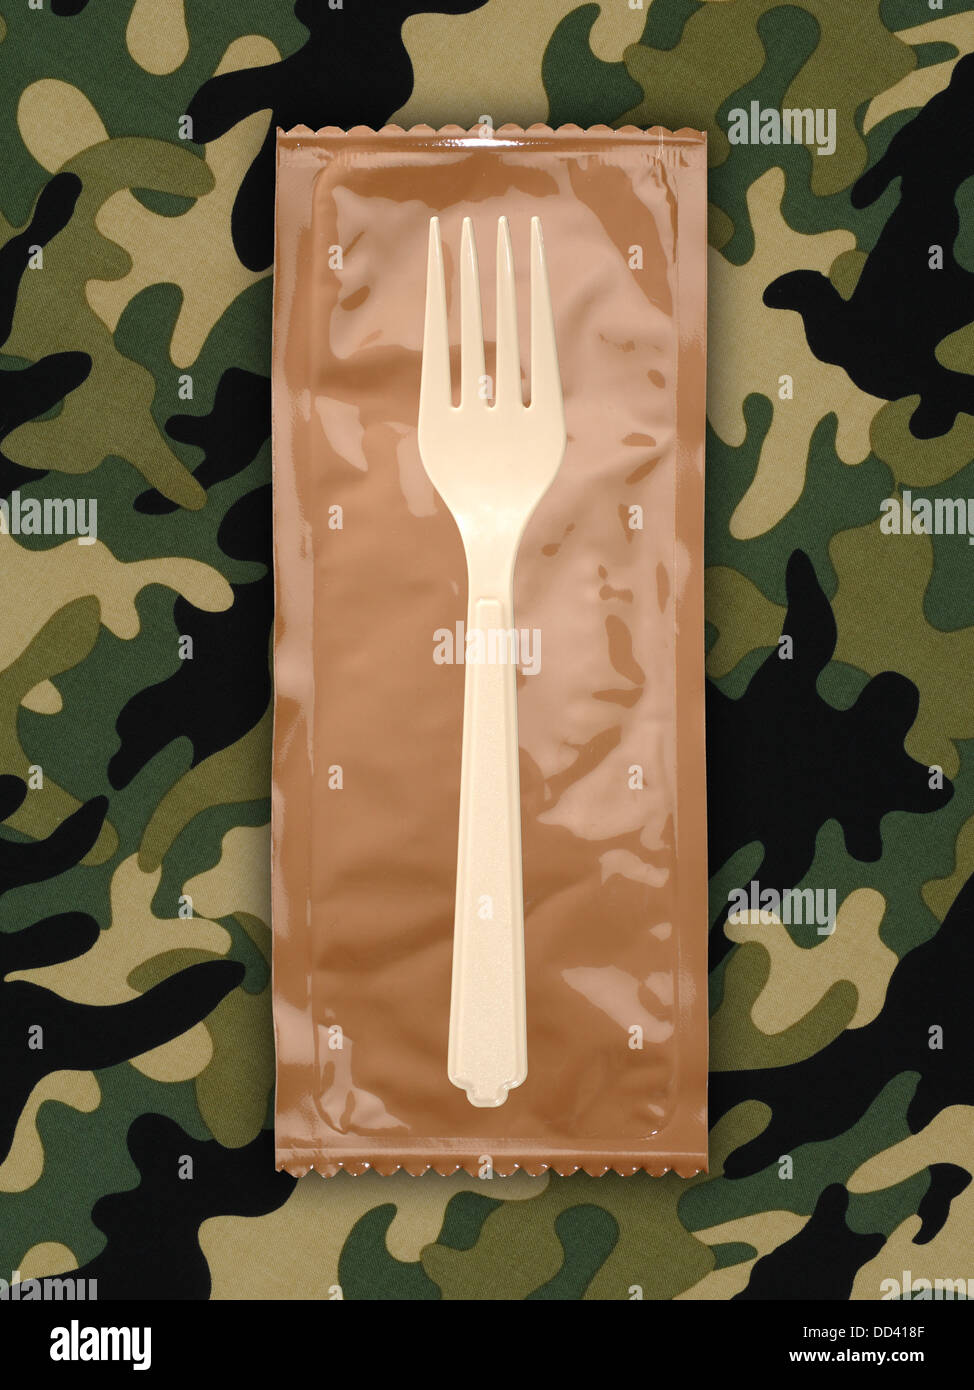 Military food rations or MRE Meals Ready to Eat on a camouflaged background. Packages open with plastic utensils. Stock Photo